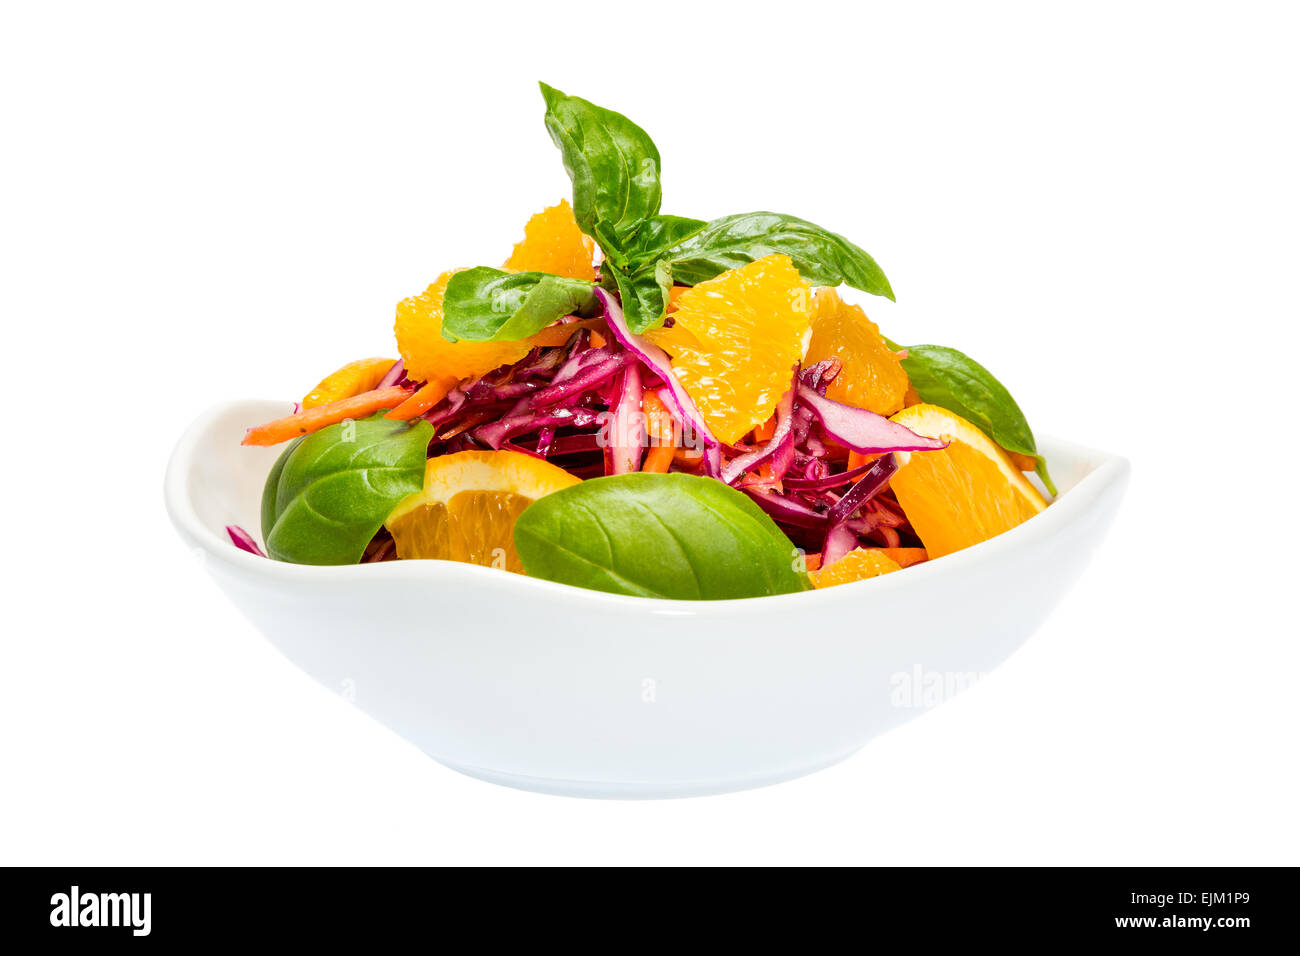 Salad of red cabbage, orange and carrots Stock Photo